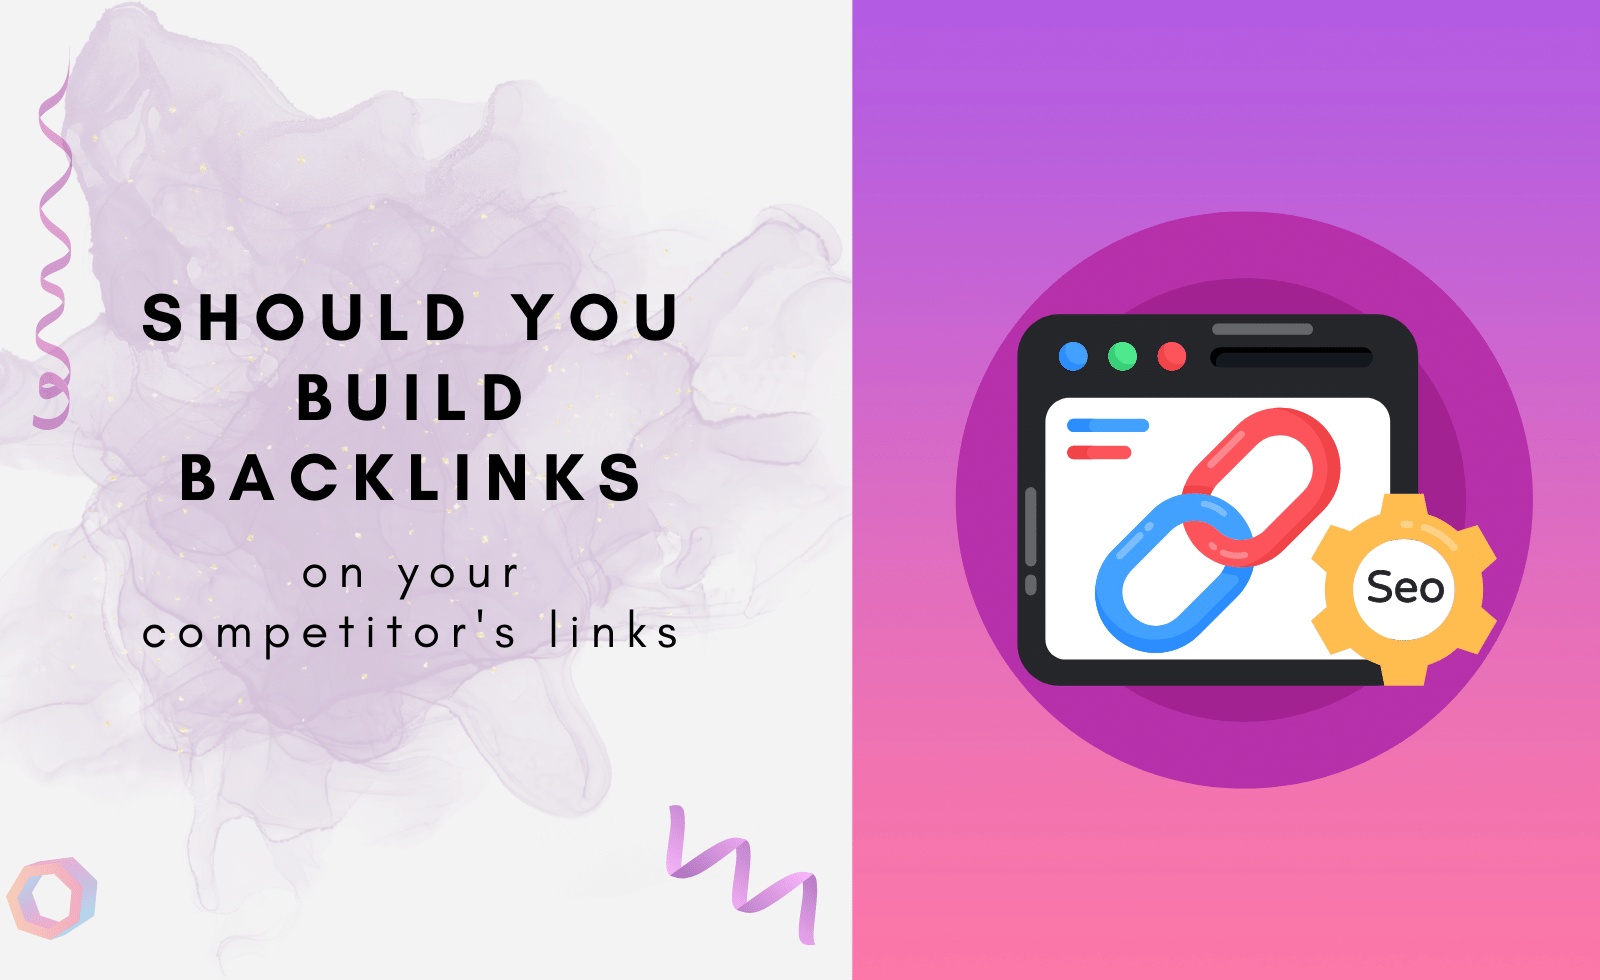 Should you build backlinks on your competitor's links